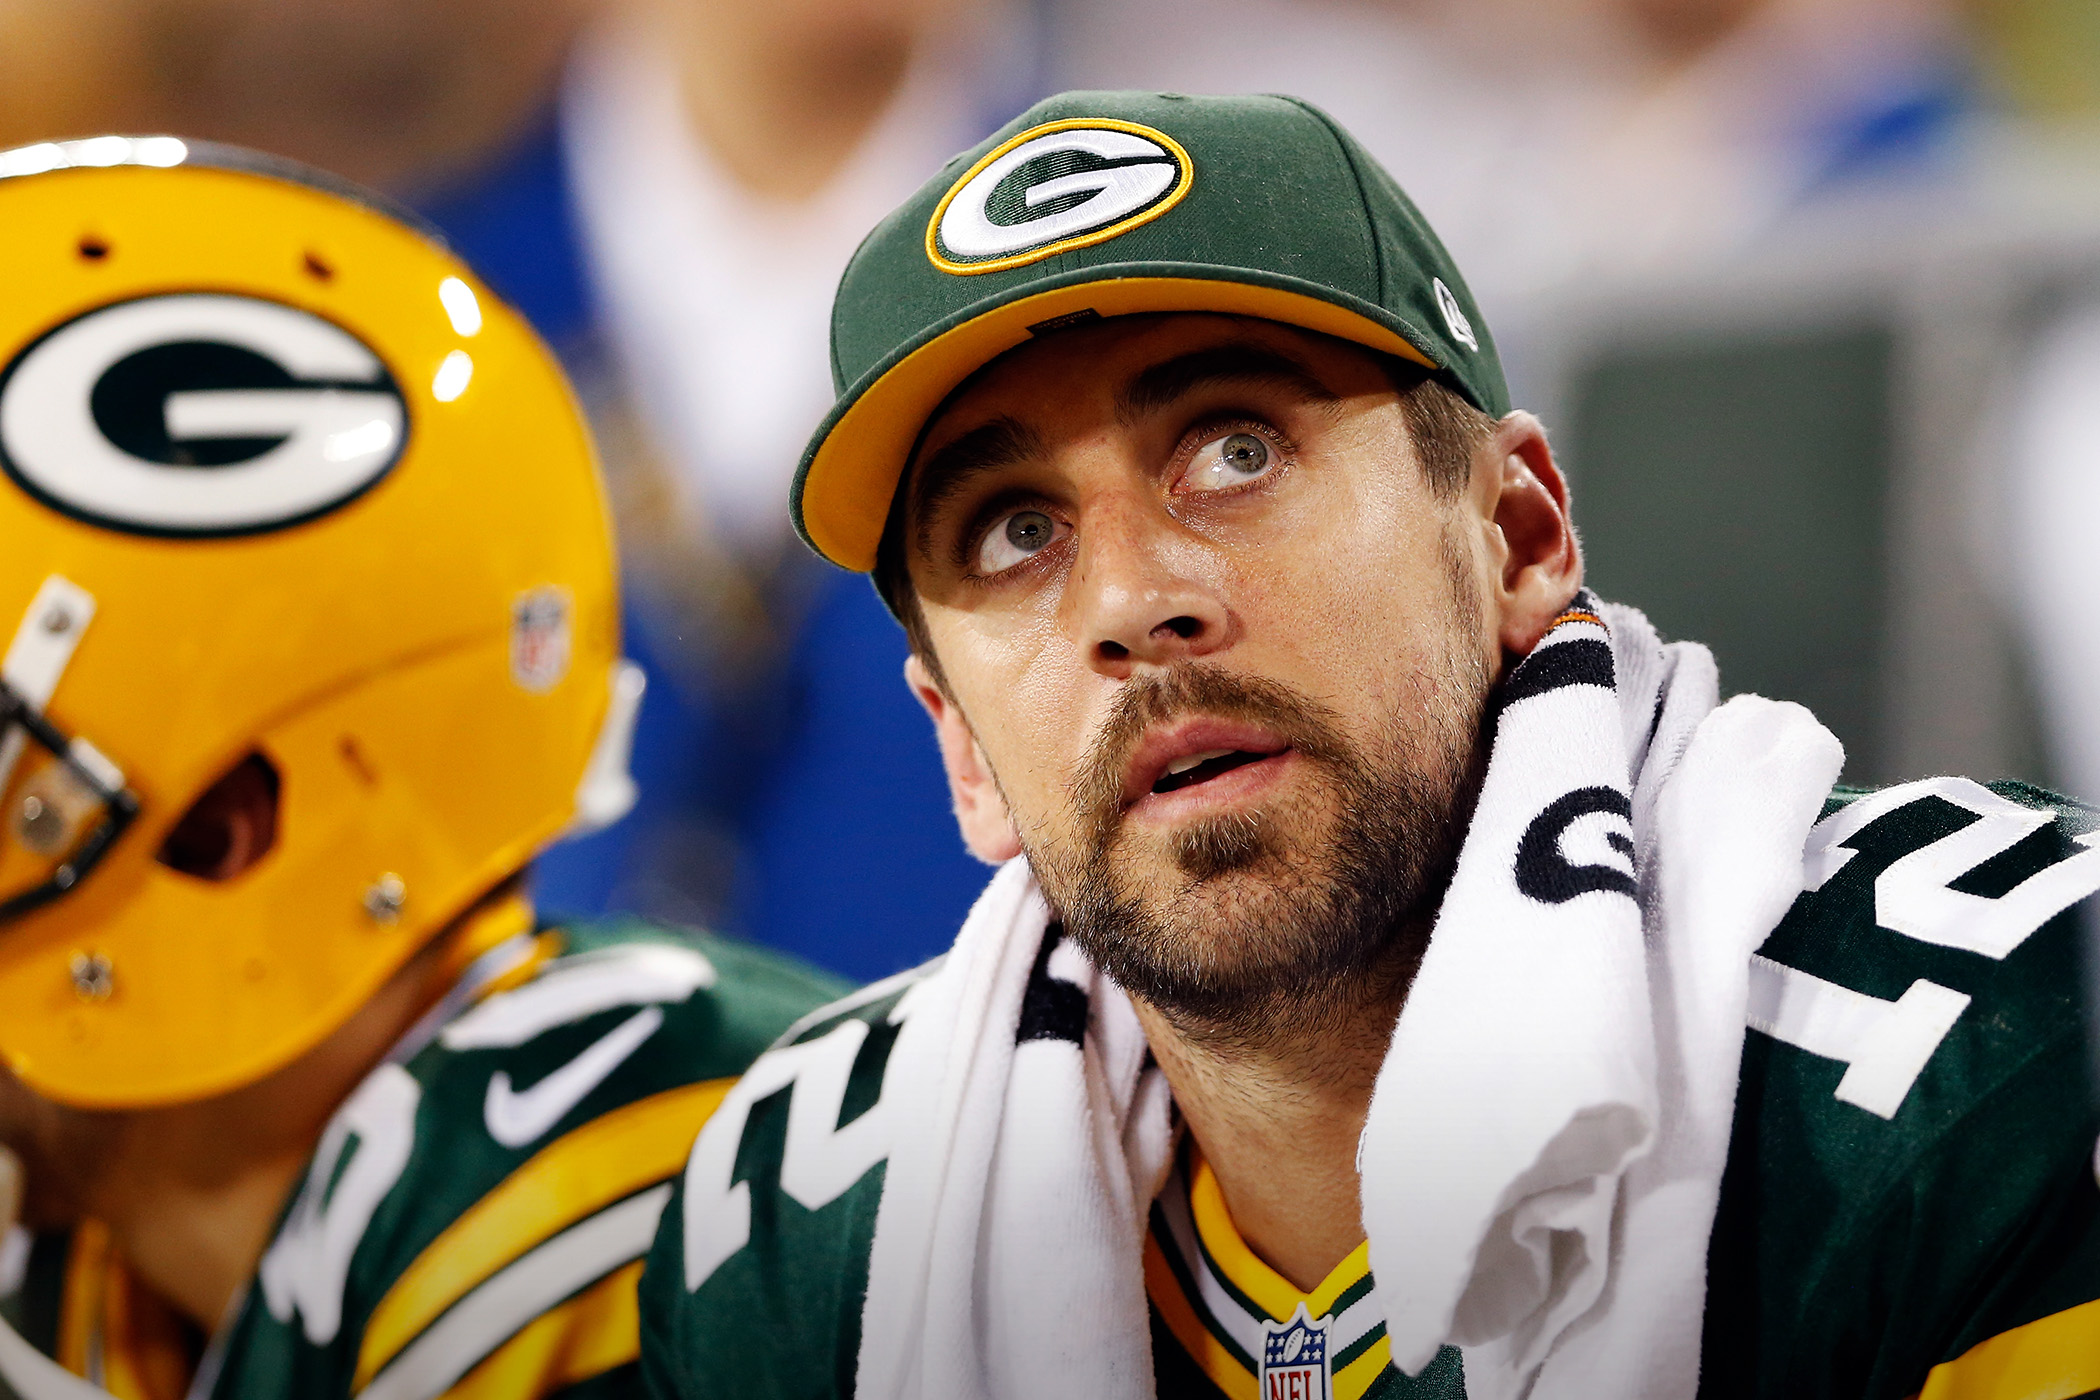 Aaron Rodgers slams alleged anti-Muslim remark during moment of silence